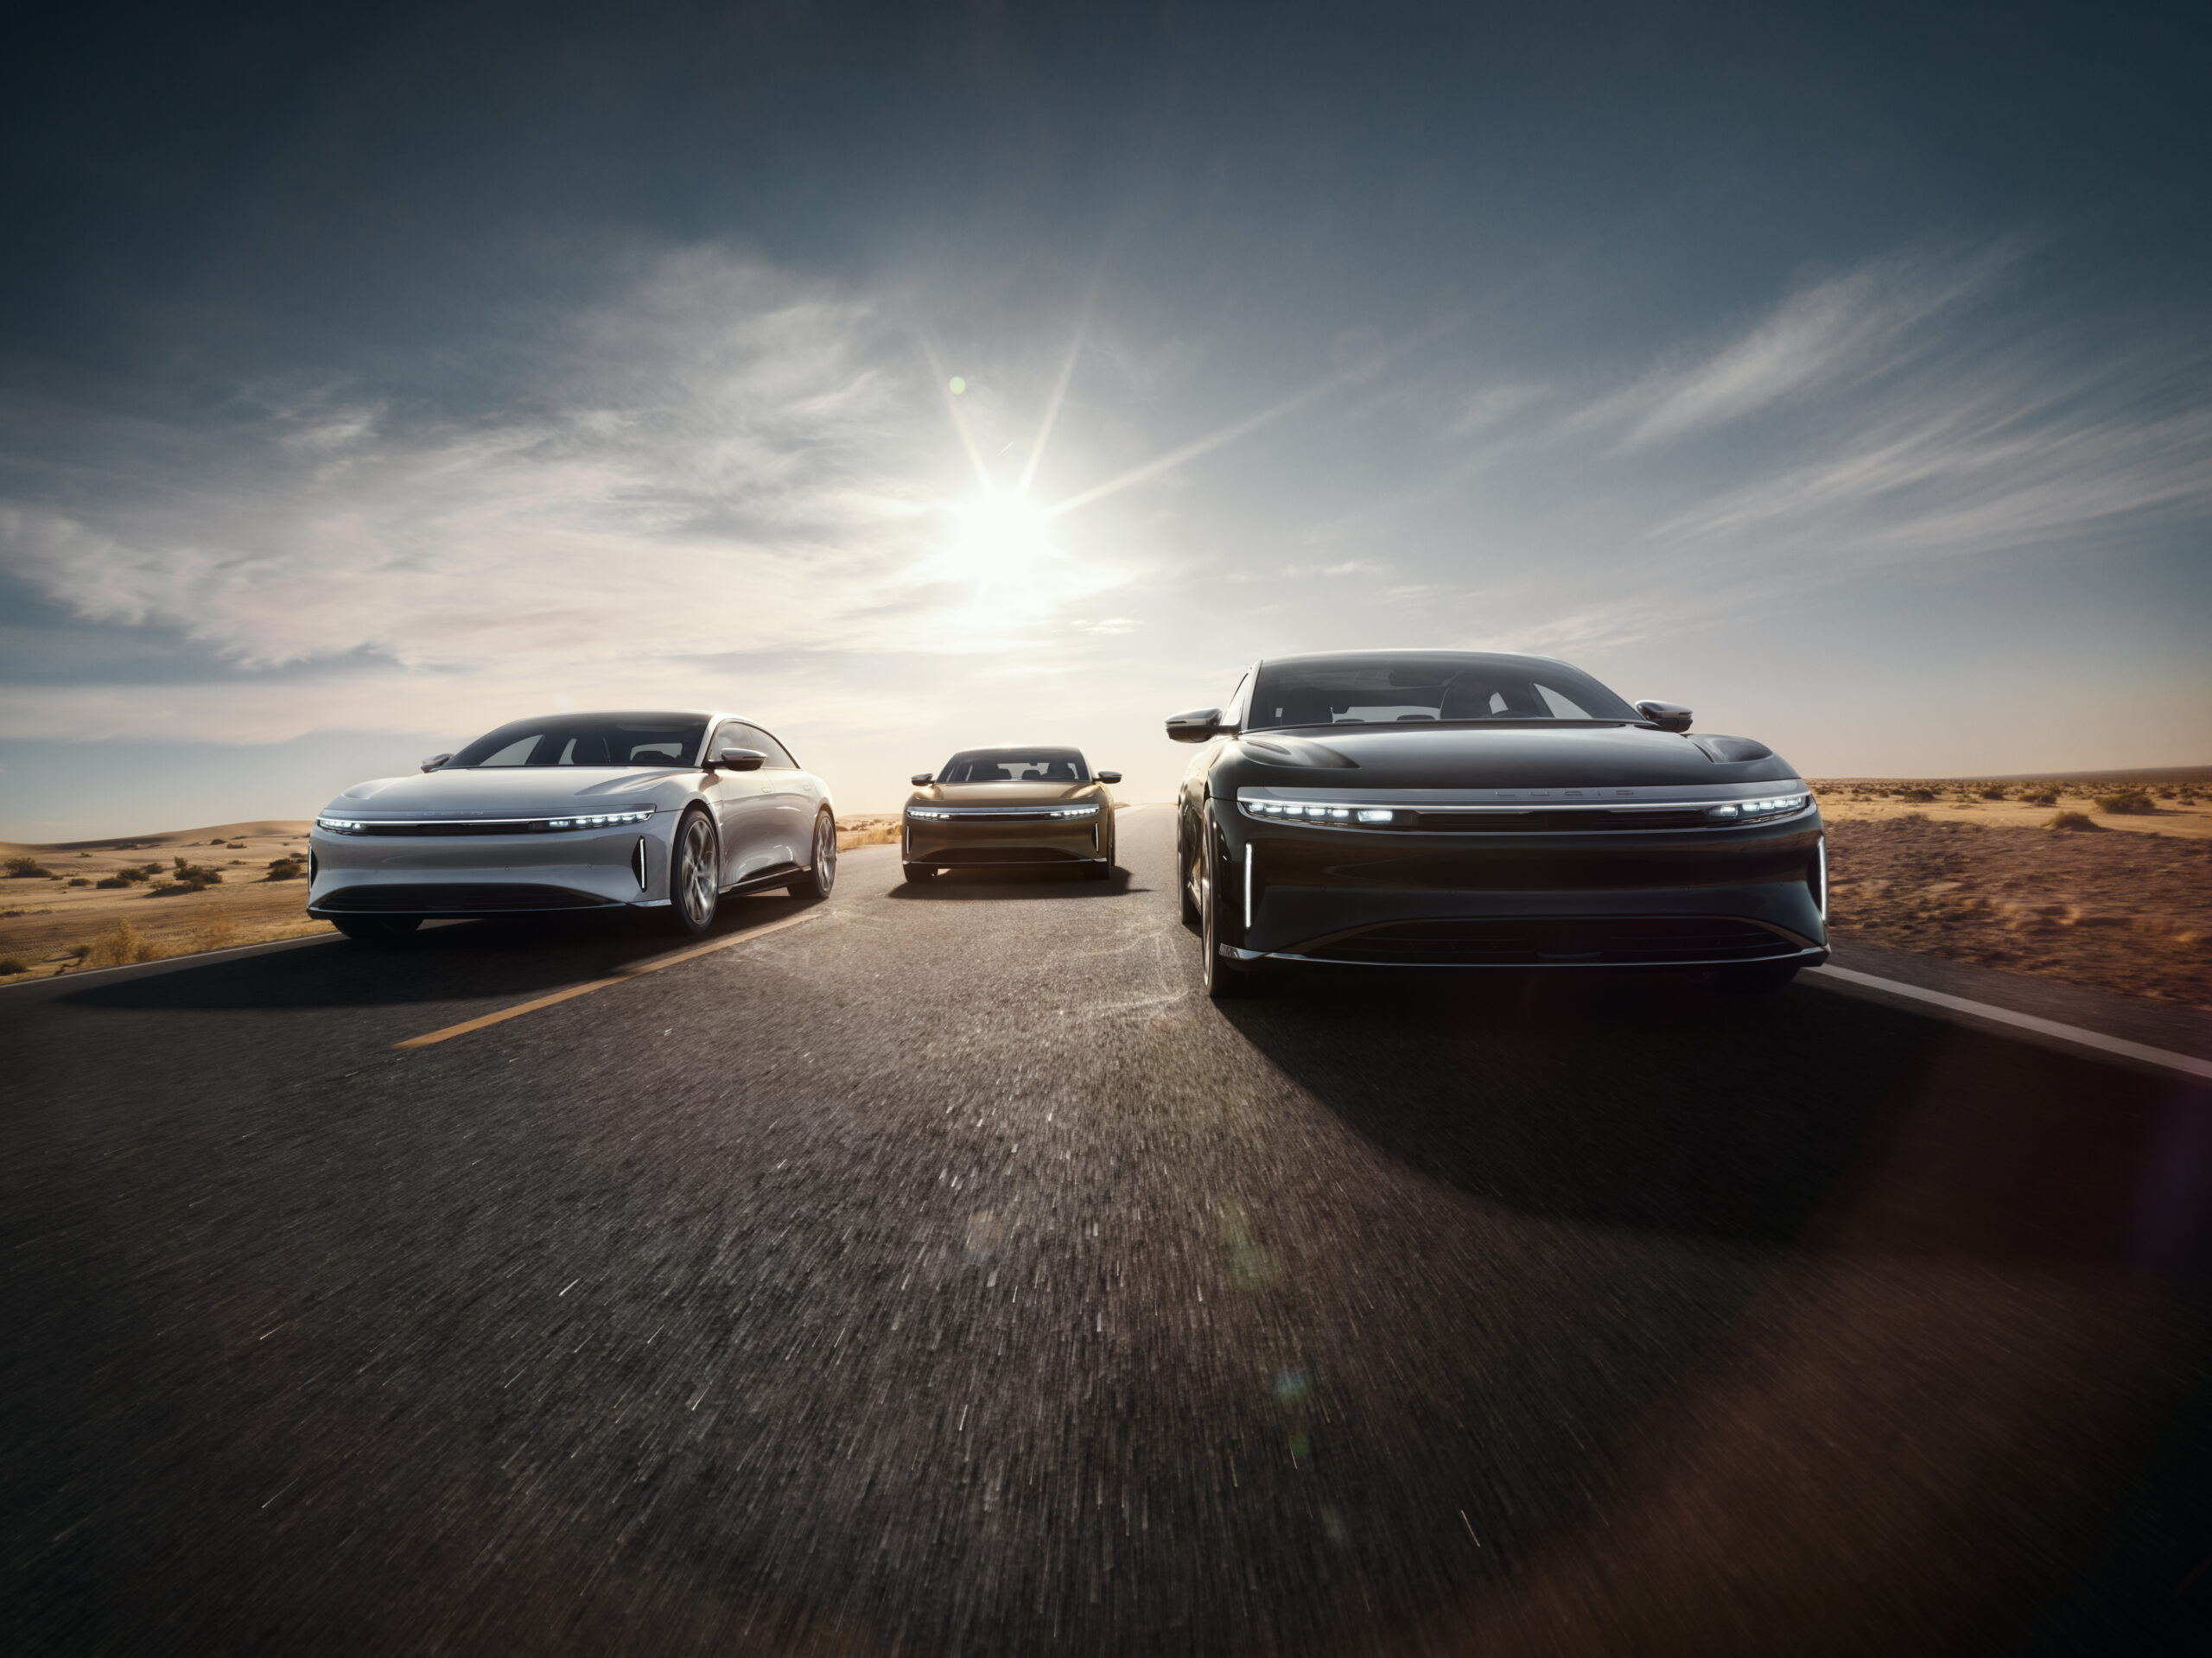 Lucid Motors Now Allows Test Drives For Touring Reservation Holders